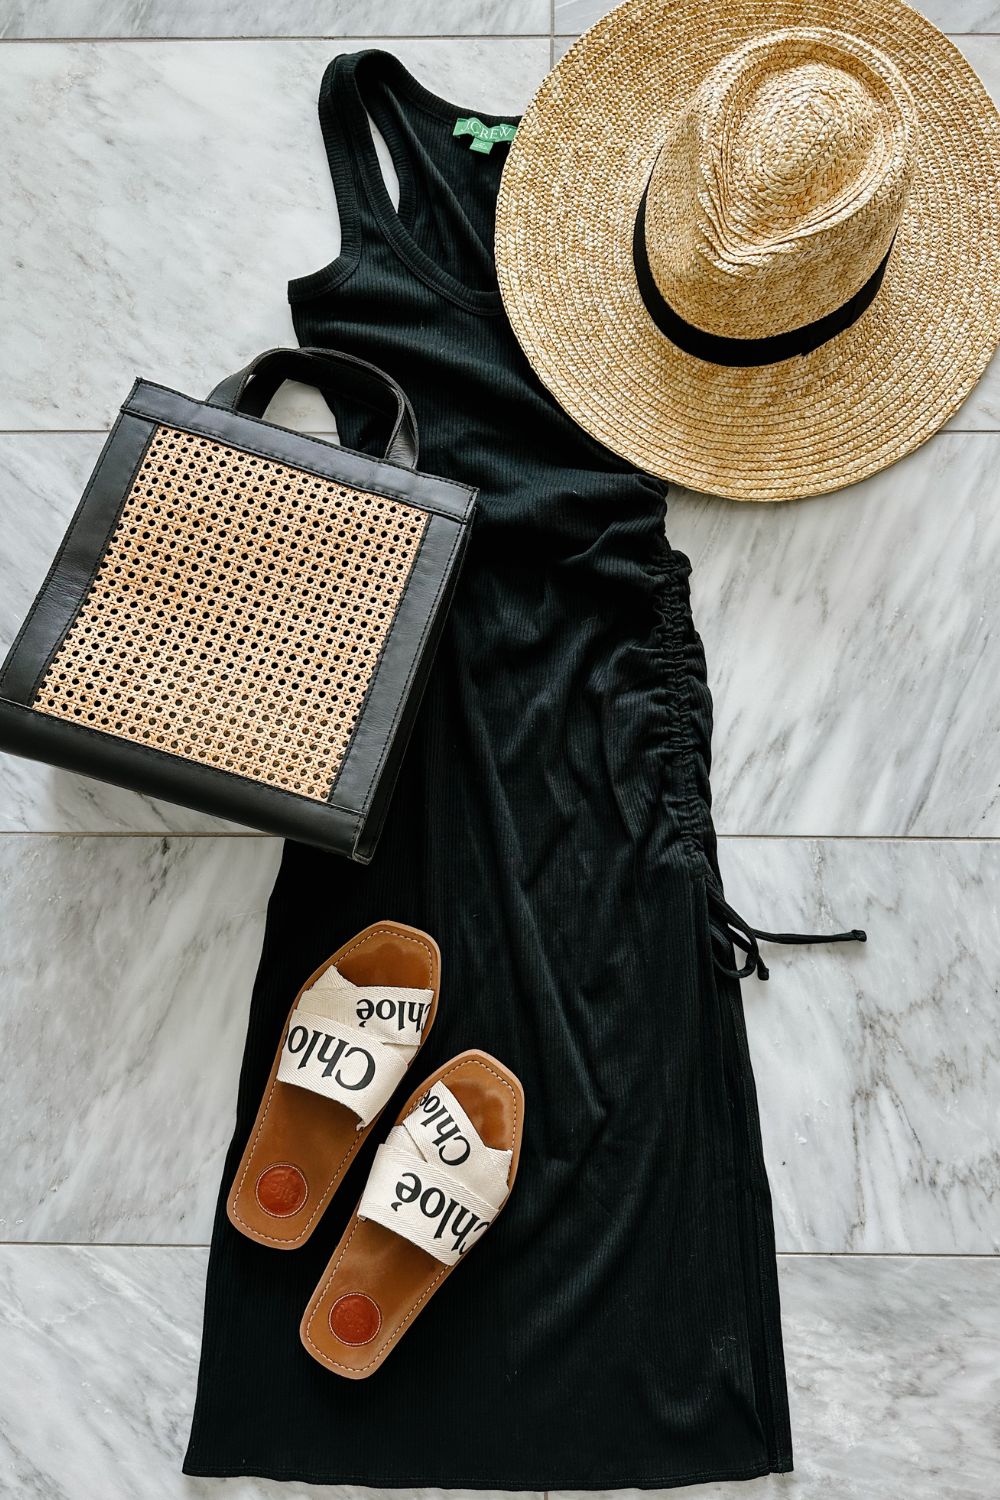 A beach vacation outfit idea of a rouched midi dress, sandals, a straw hat and bag 